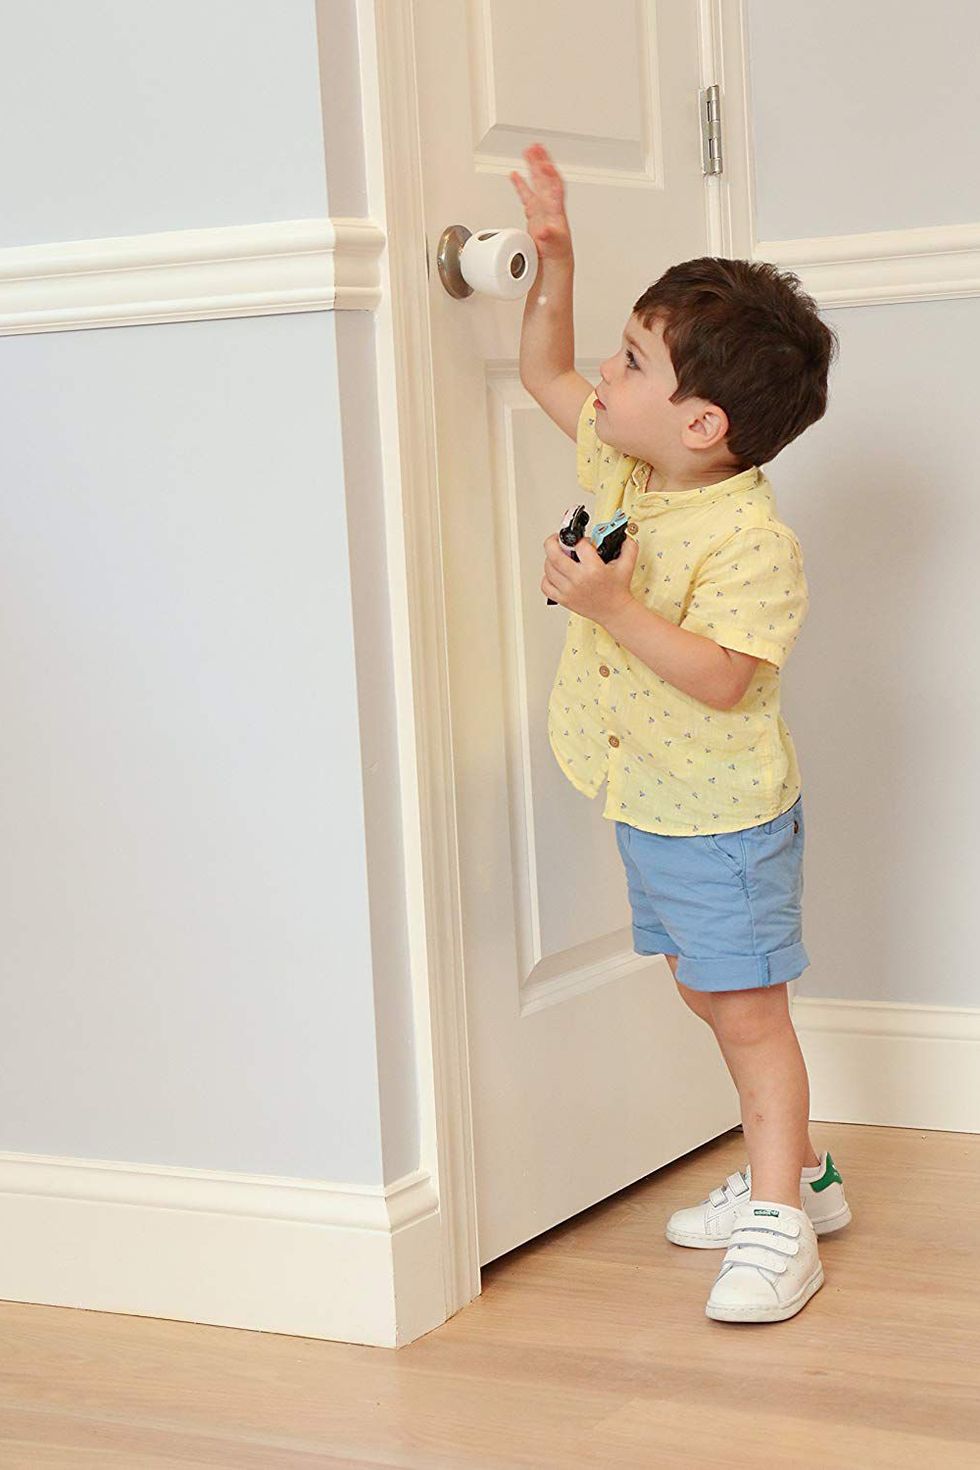 How to Baby Proof Drawers: Keep Your Little Ones Safe